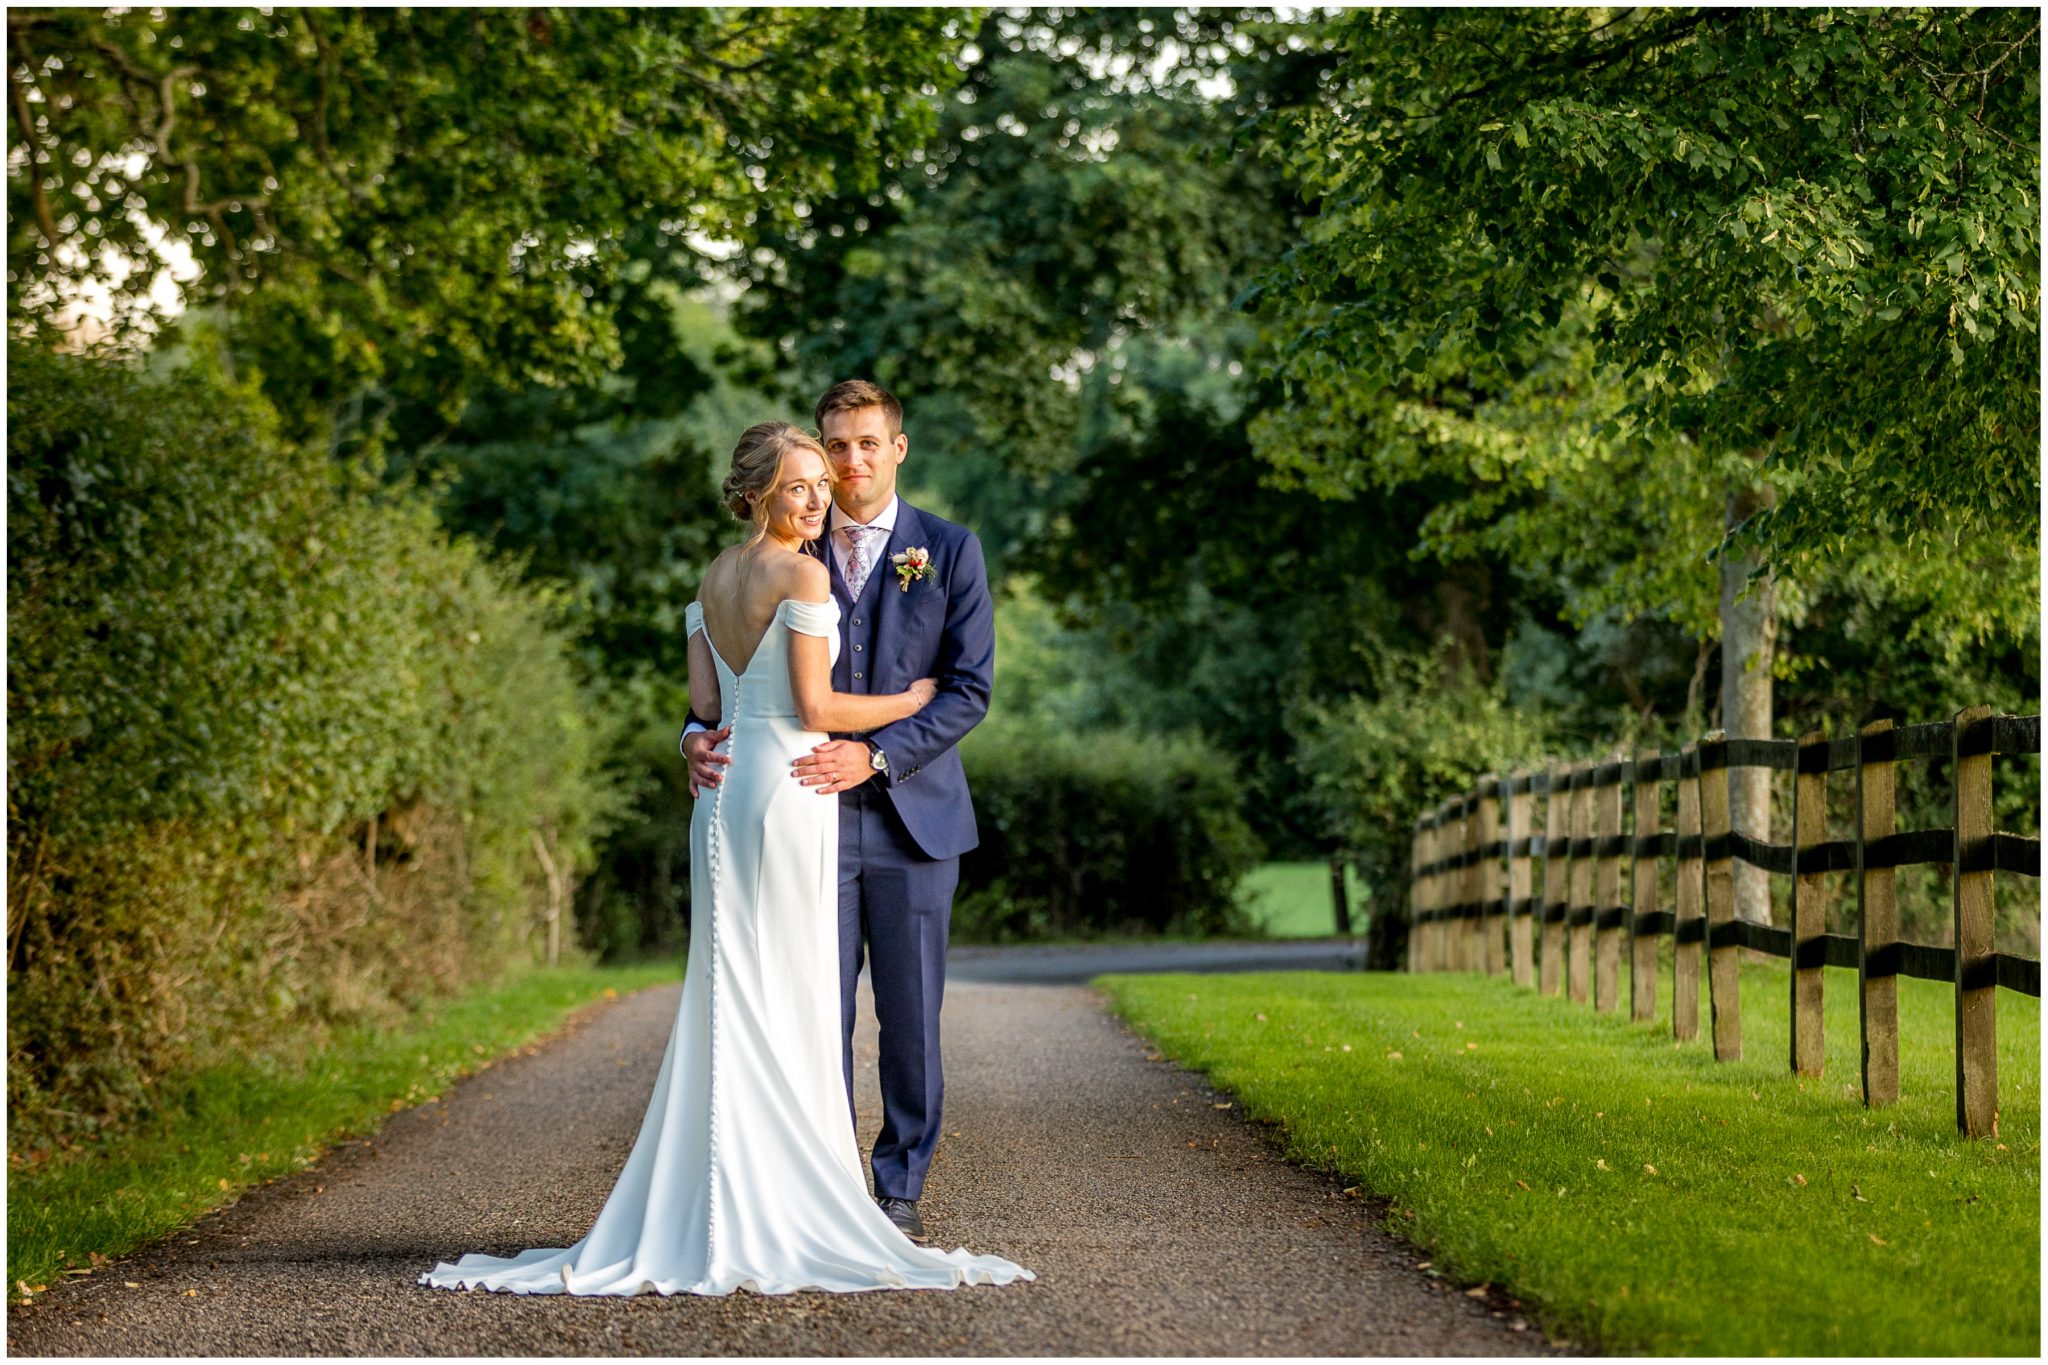 Bride and groom colour portrait in the grounds of Holywell Estate wedding venue